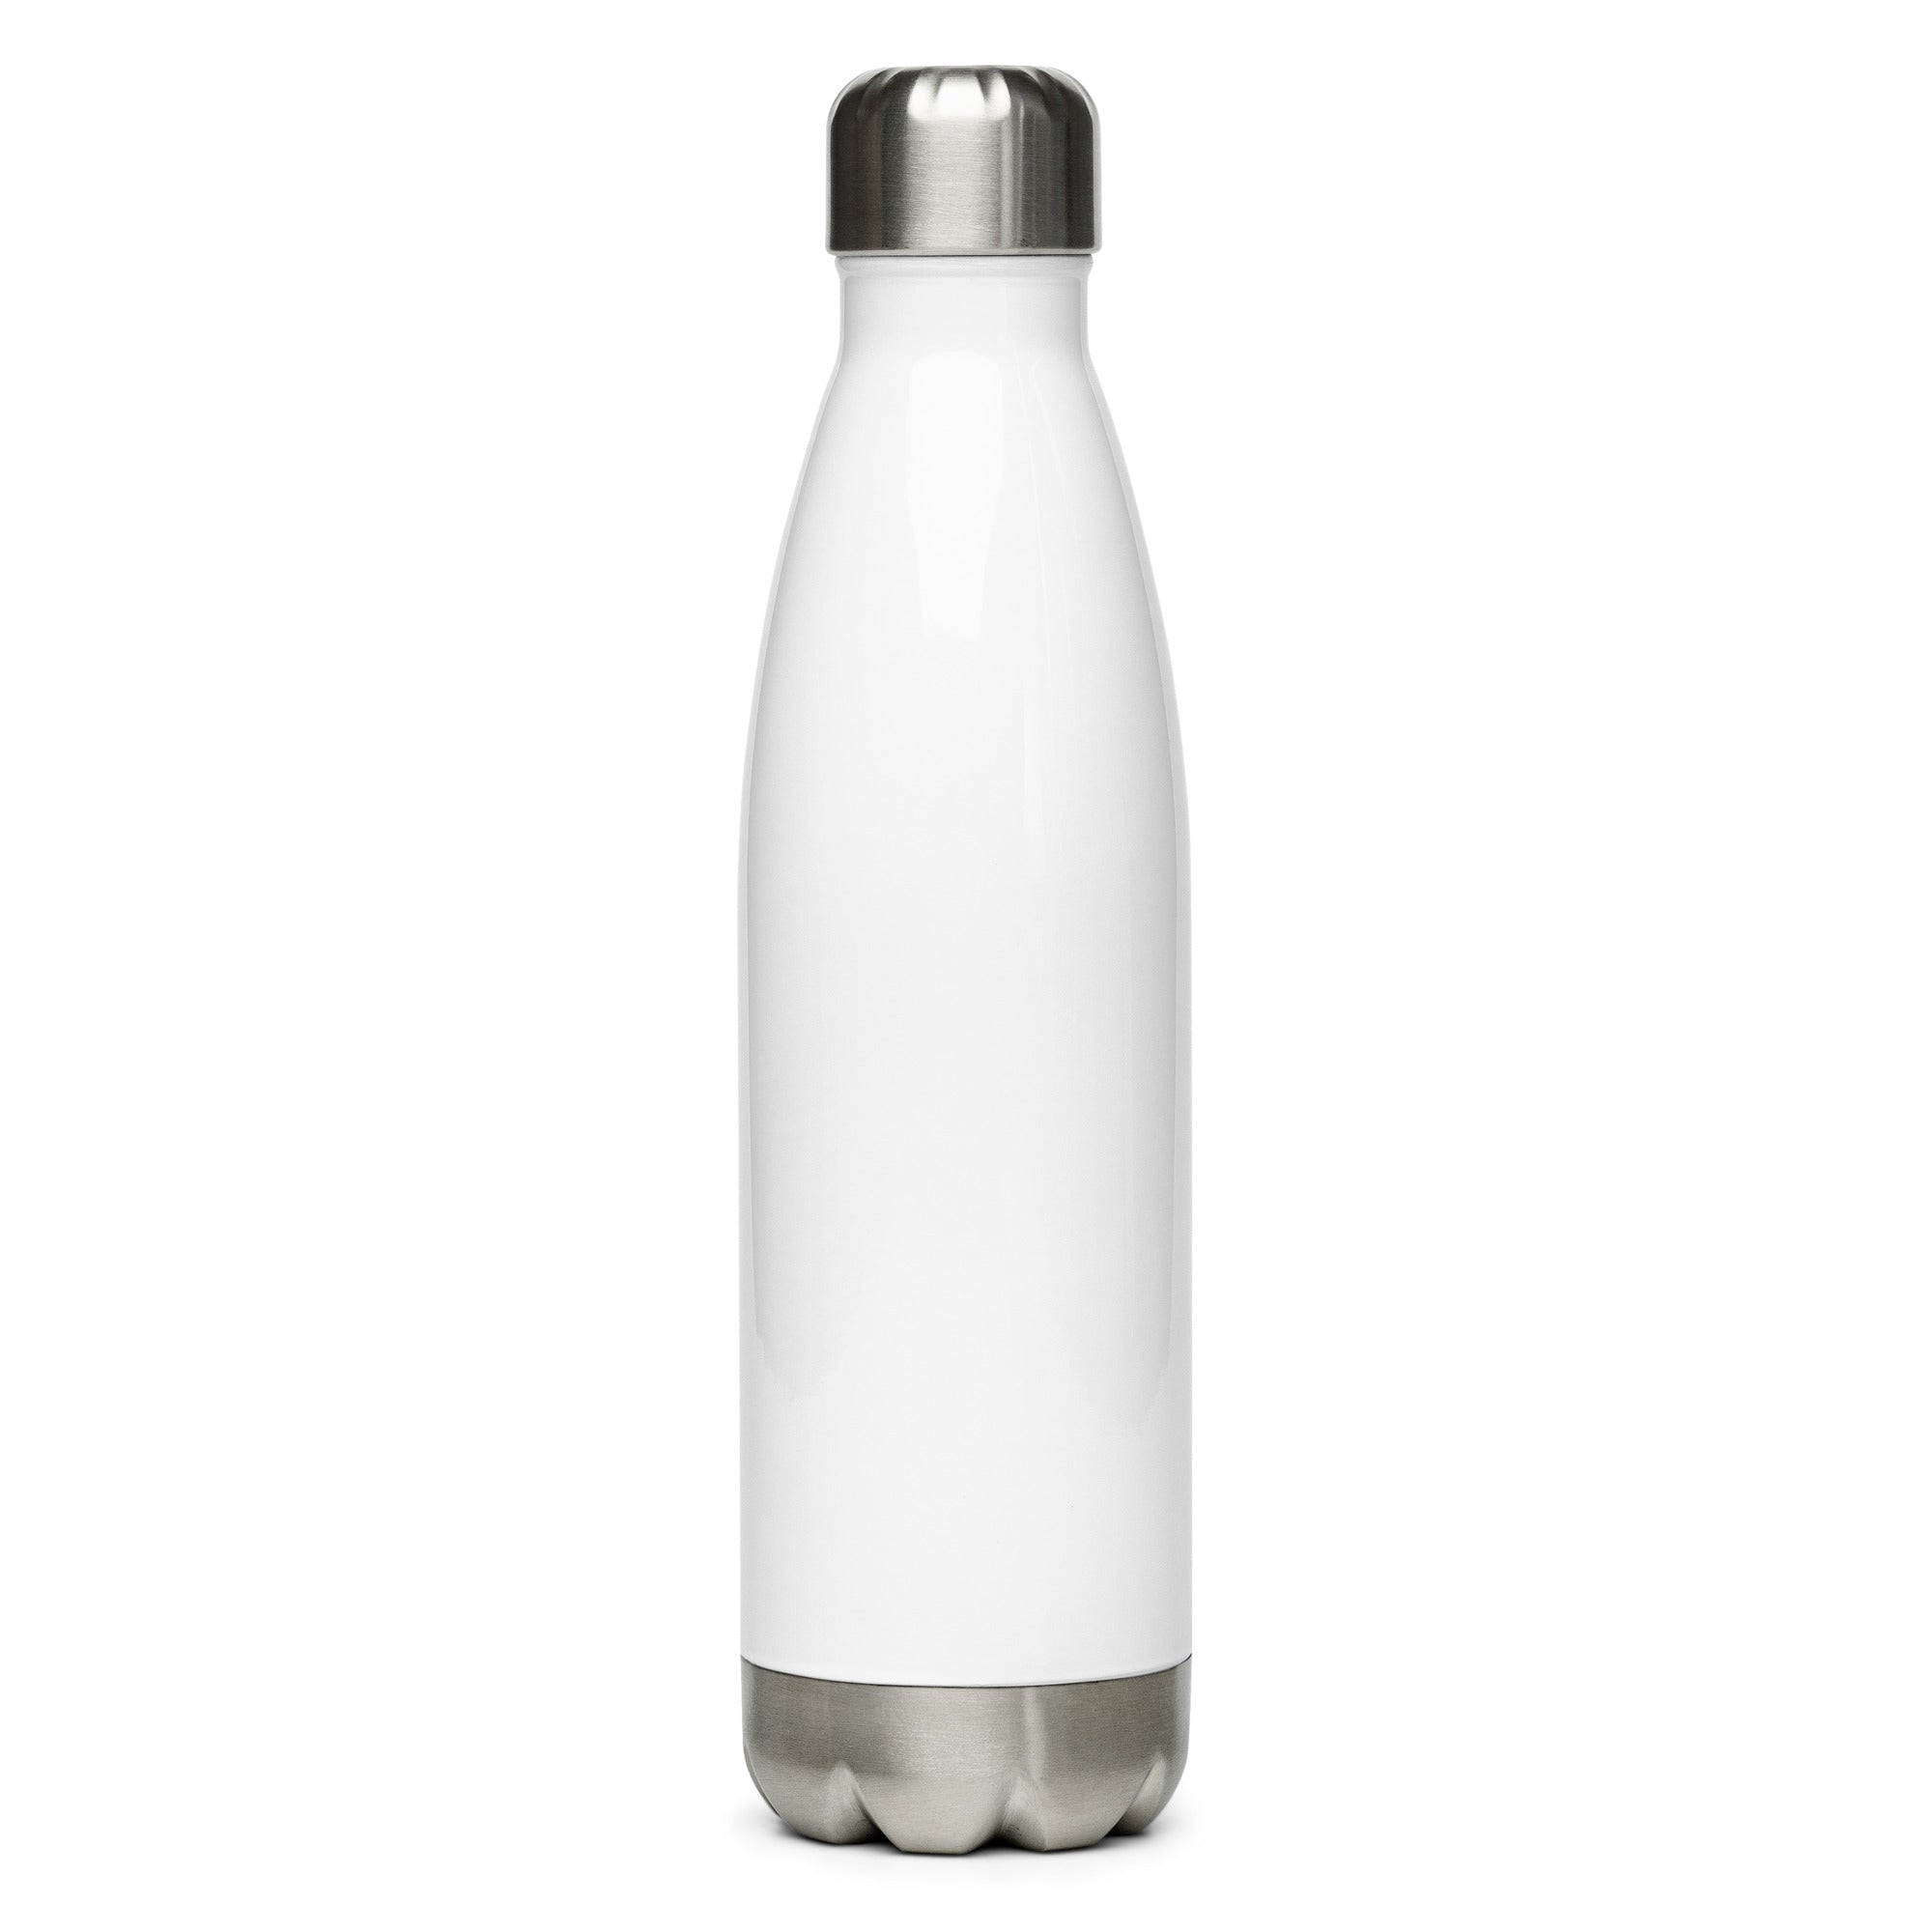 God Save The Queens Classic Royal Stainless steel water bottle